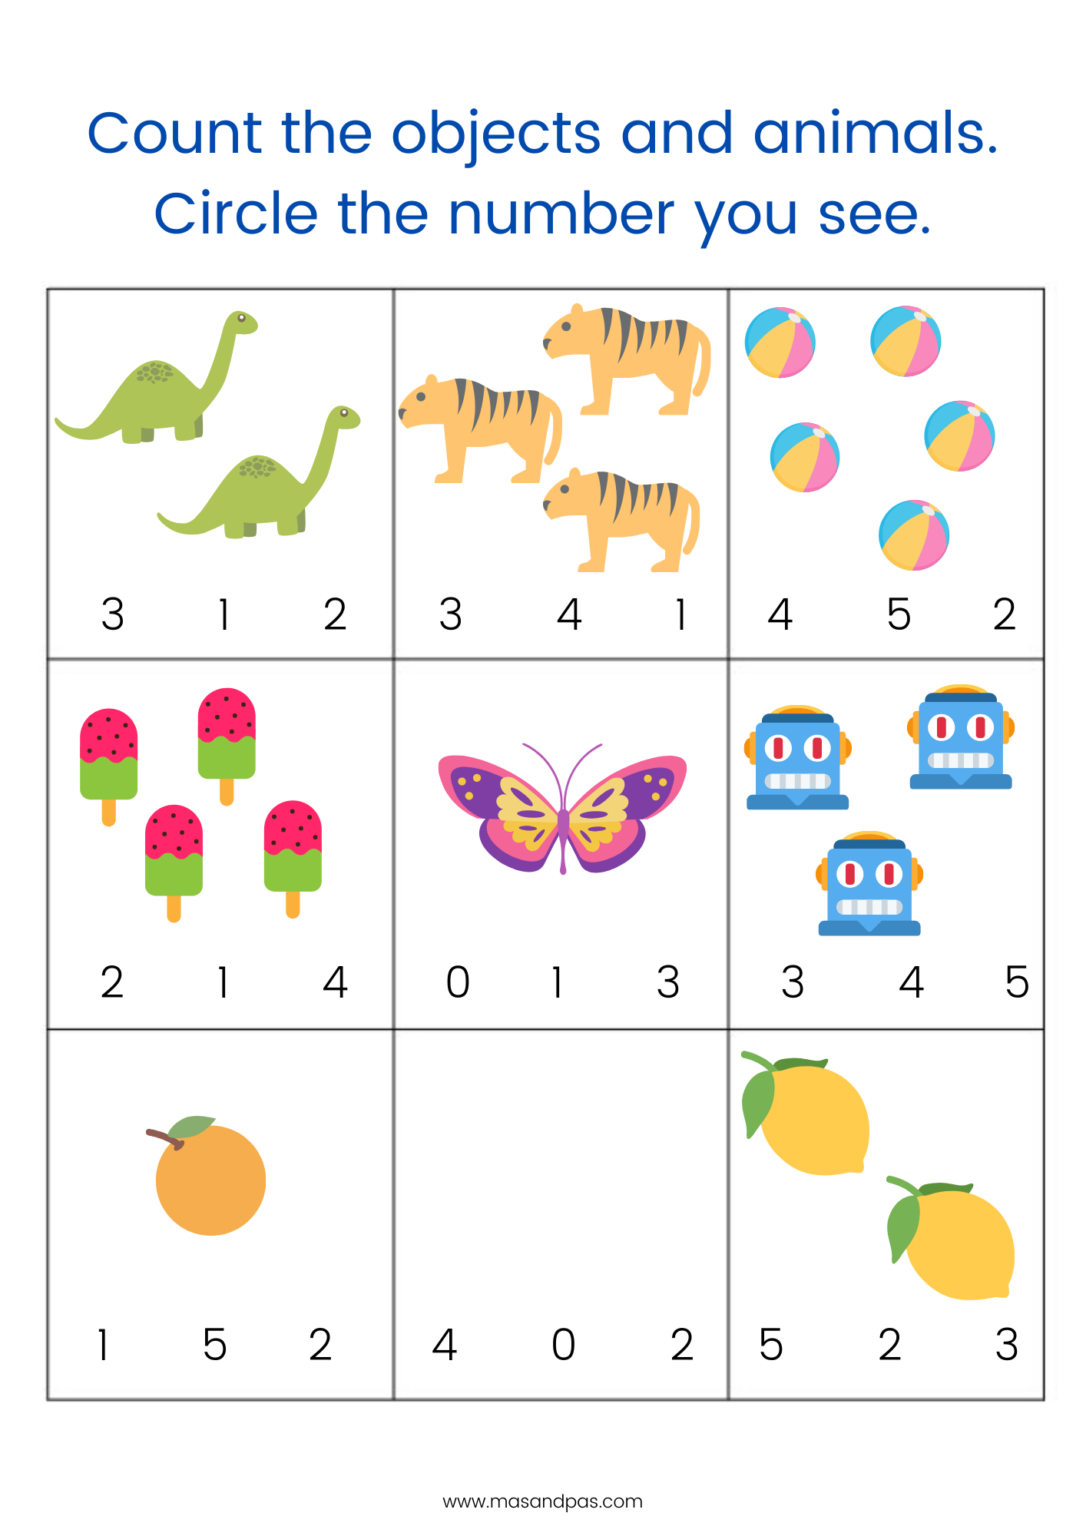 download the new version for ios Number Kids - Counting Numbers & Math Games